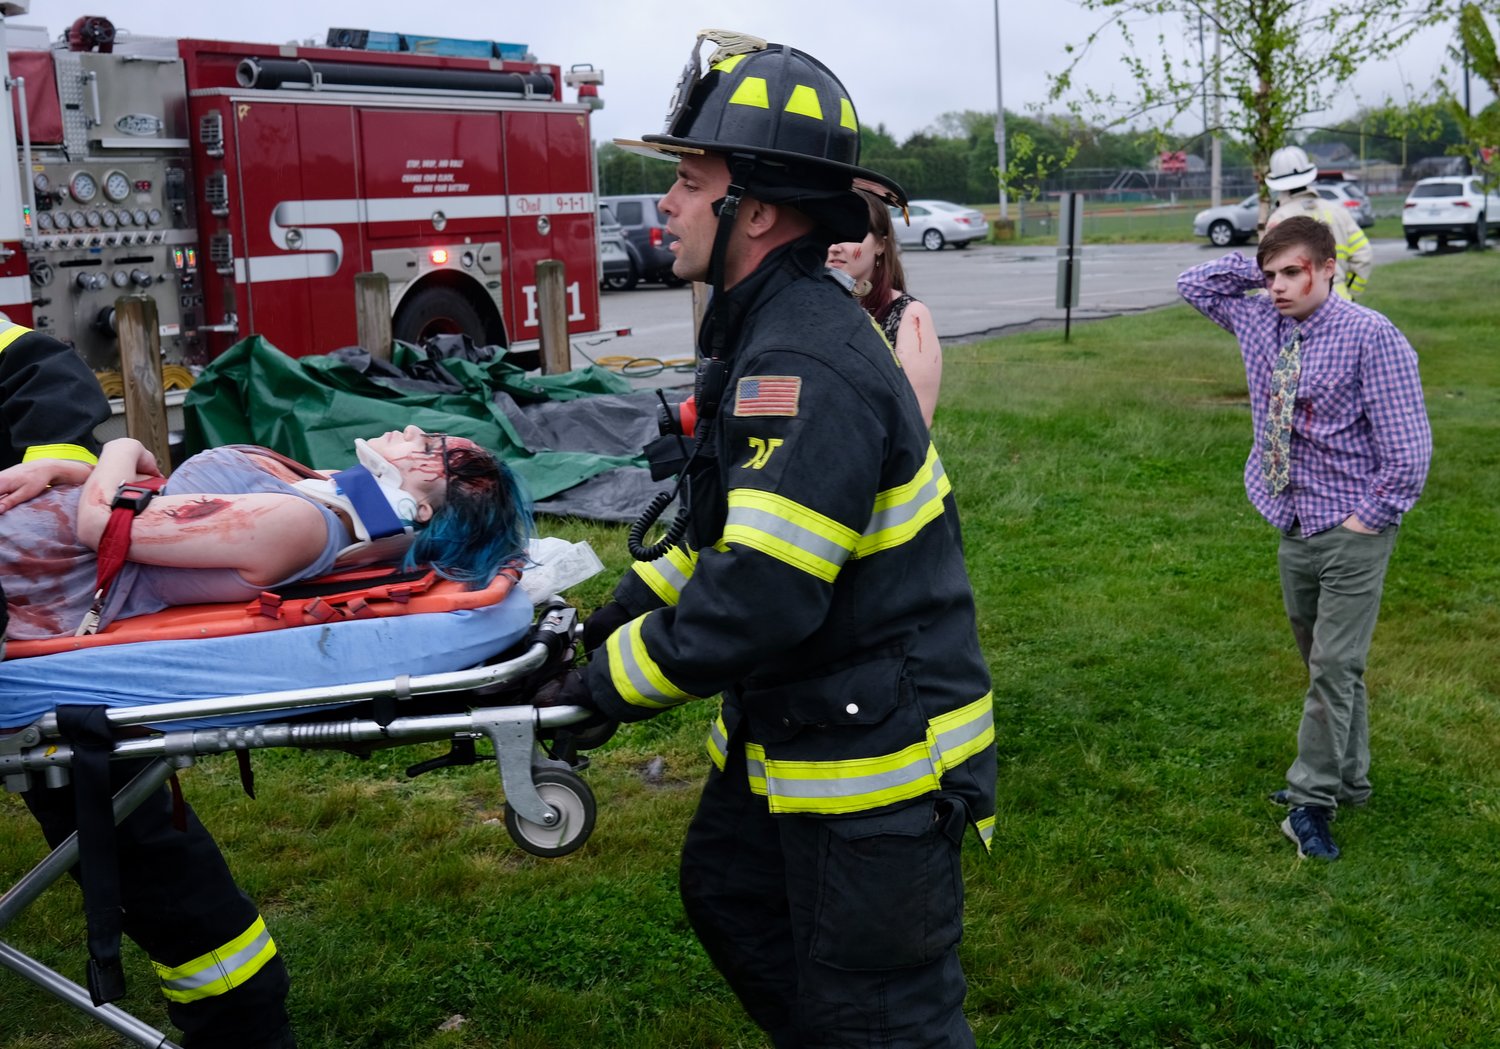 Megan Conant played a student who had to be removed from the back of a car using the Jaws of Life. Her friend Josh Champagne helplessly looks on as she’s taken away on a stretcher.